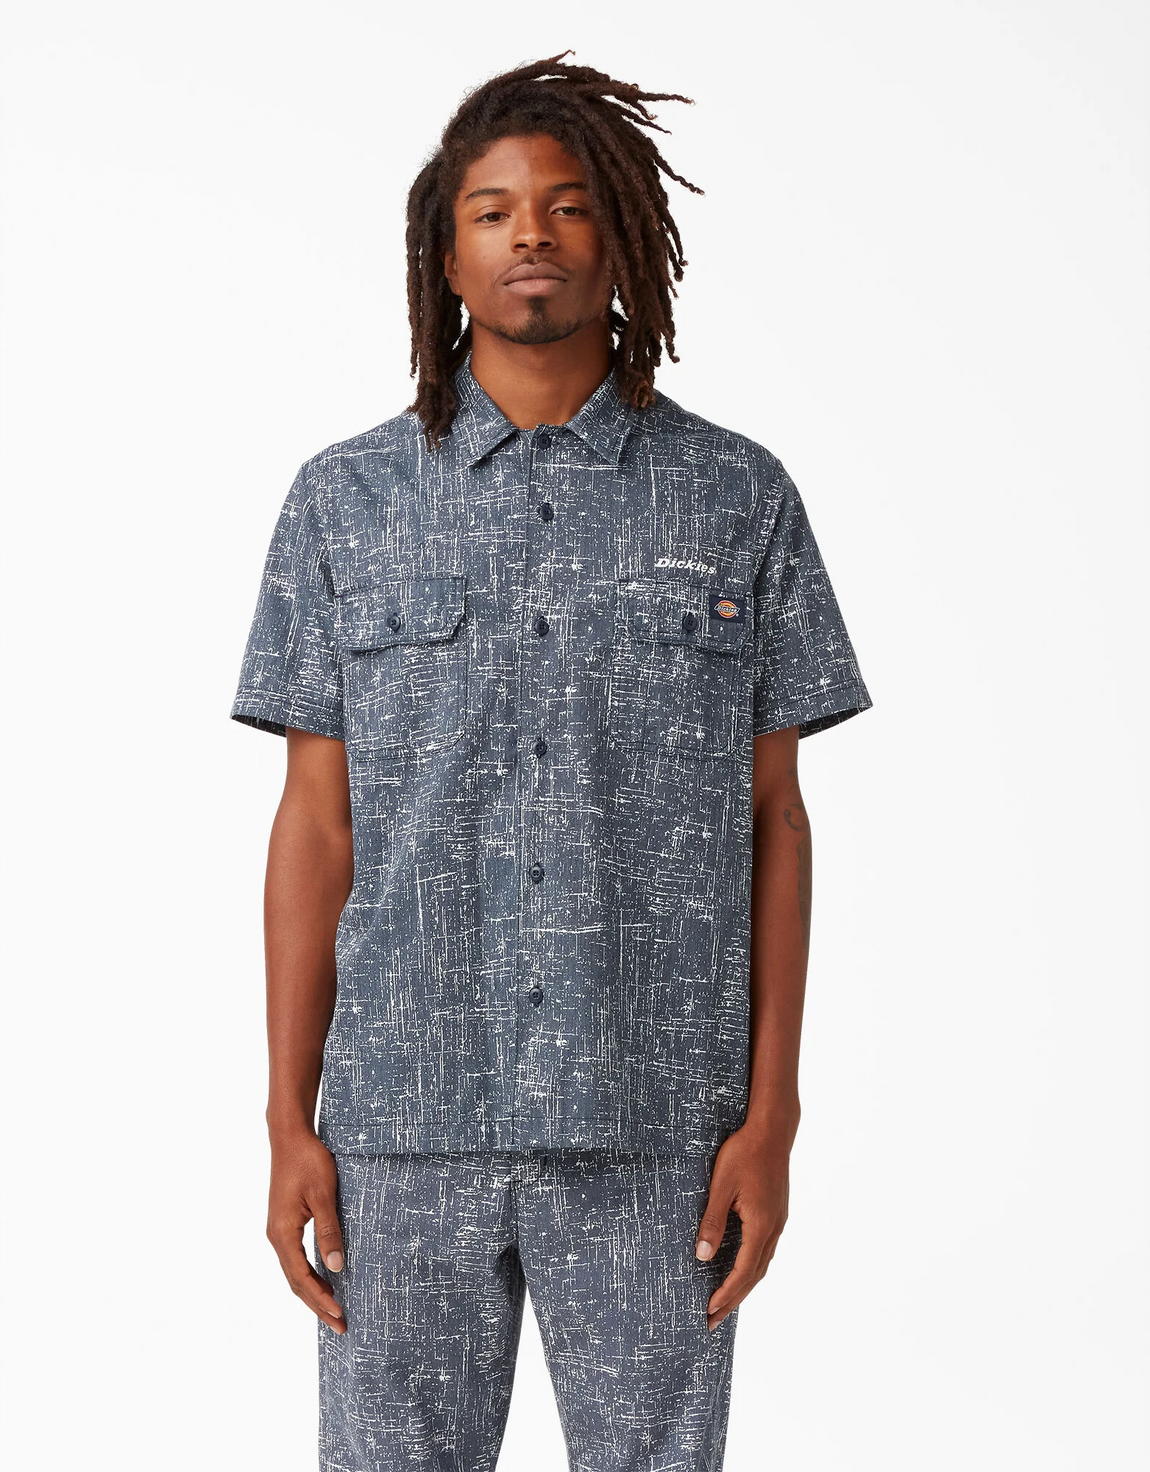 Dickies Embroidered Short Sleeve Work Shirt (Rinsed Navy Crosshatch) - Dickies Embroidered Short Sleeve Work Shirt (Rinsed Navy Crosshatch) - 